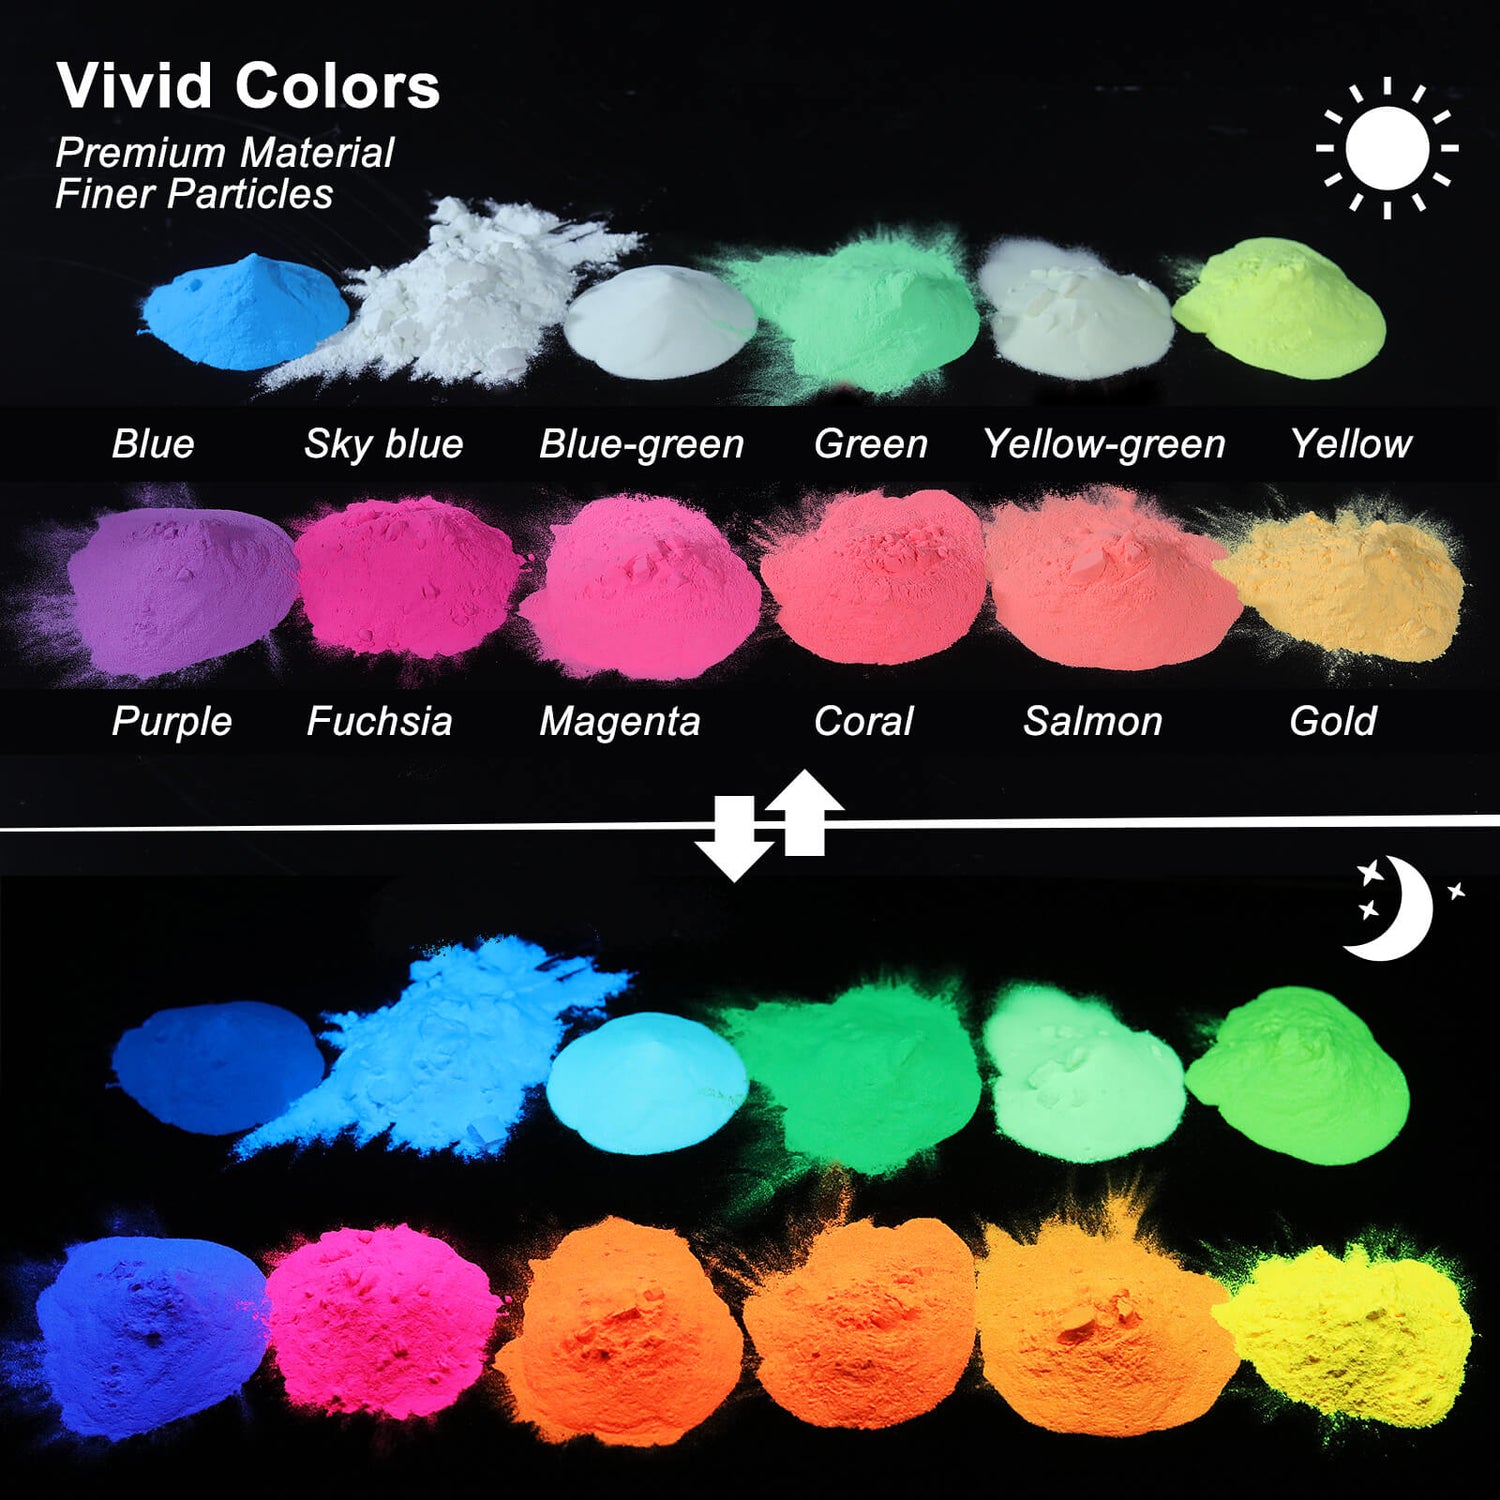 10 Color Glow In The Dark Pigment Powder with UV Lamp - Epoxy Resin  Luminous Powder for Slime Kit,Skin Safe Long Lasting Self Glowing Dye for  DIY Nail